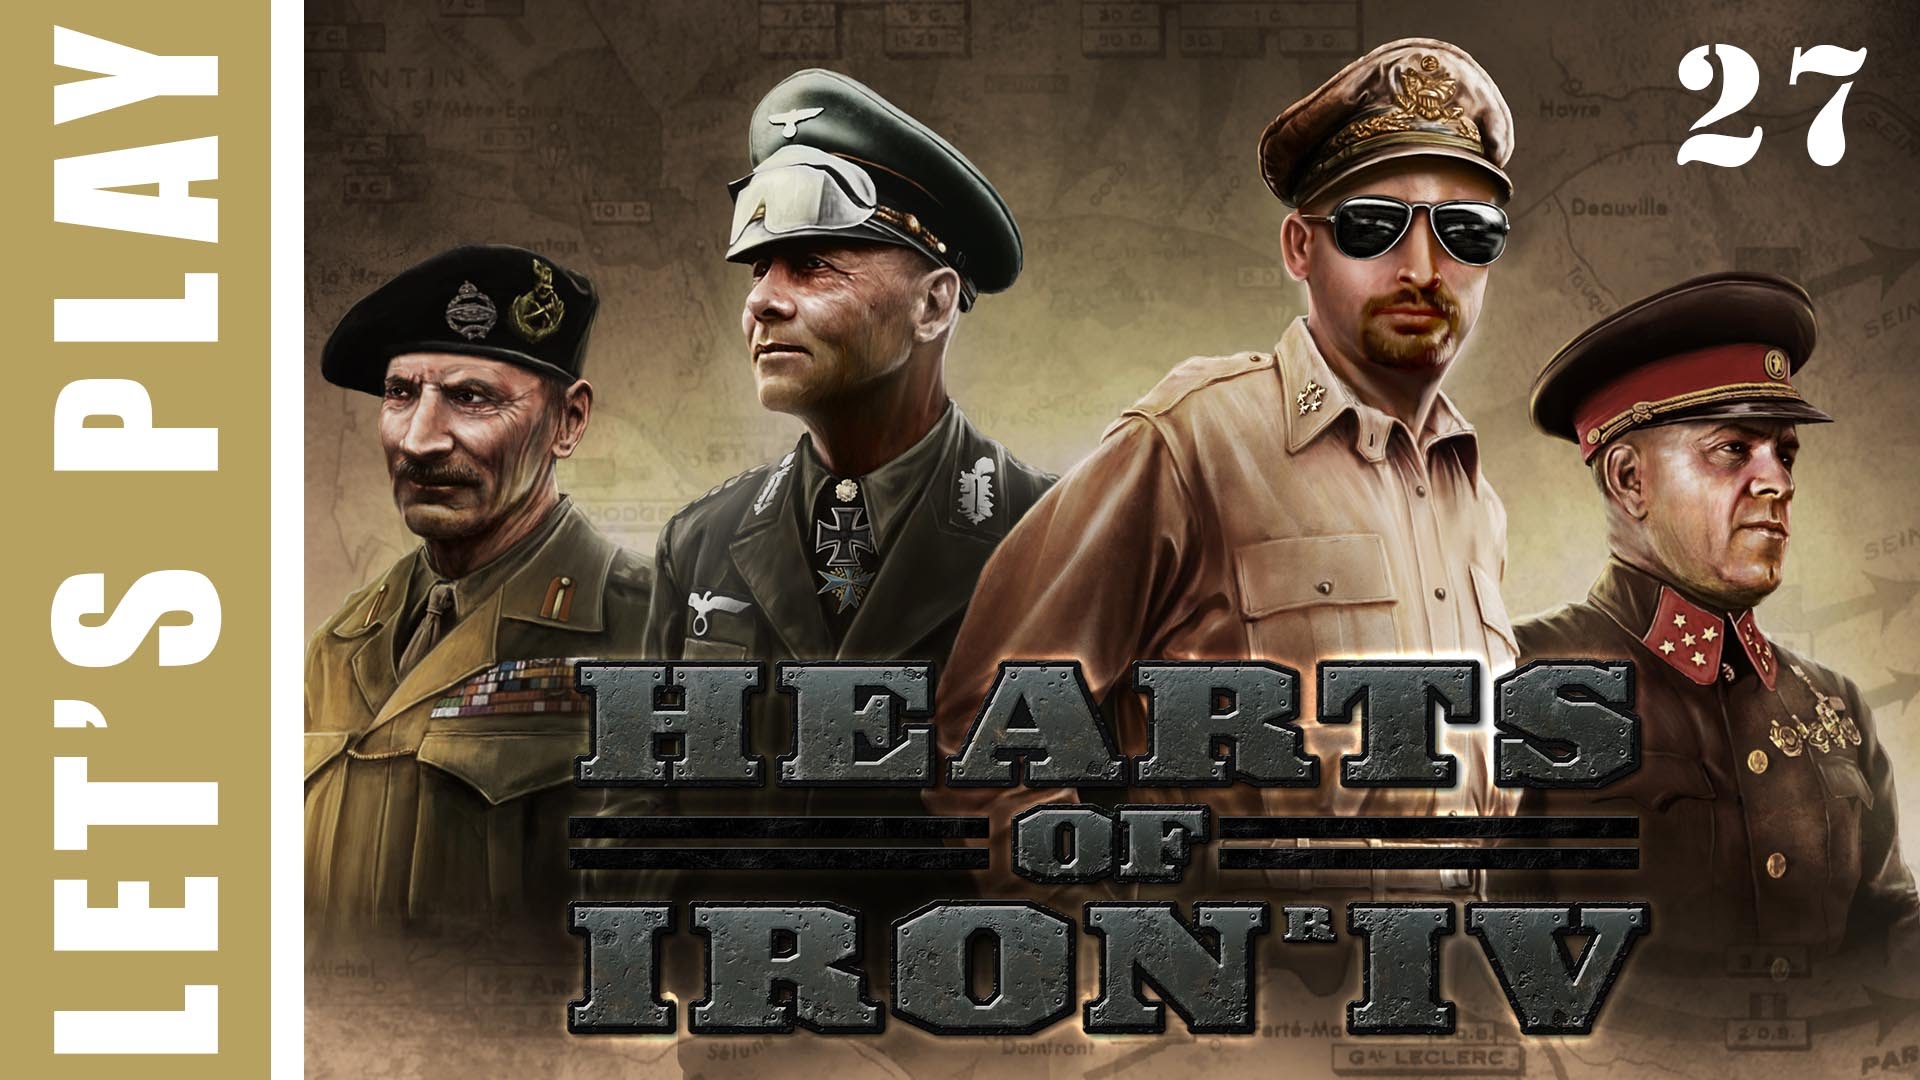 Hearts of Iron IV Germany Wins World War 2 Let’s Play 27